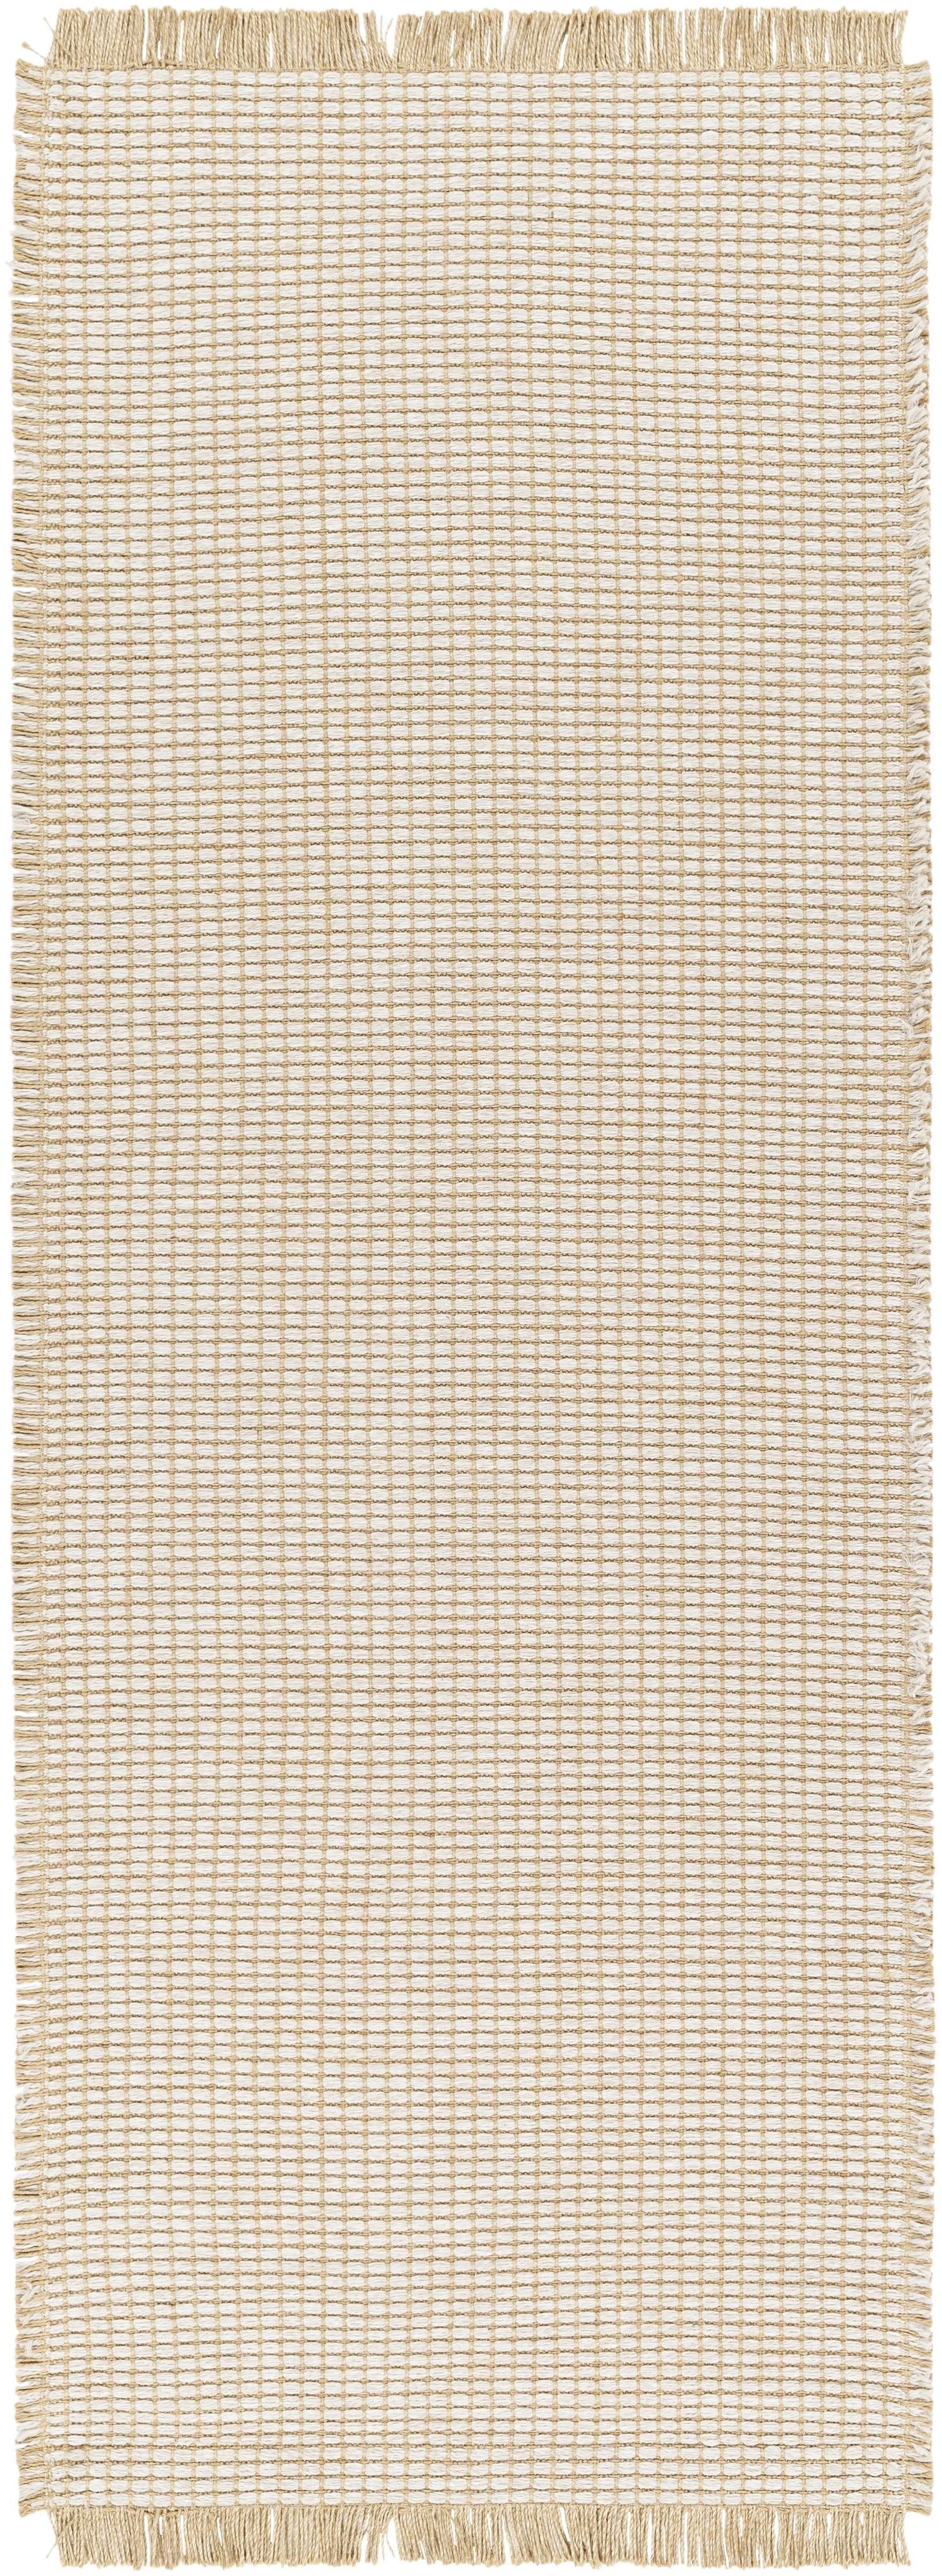 This unique and exquisite Kimi area rug is a special collaboration piece from our Becki Owens x Surya line. The perfect addition to any space, this beautiful rug features a unique stitched design made of polypropylene and jute. Amethyst Home provides interior design, new home construction design consulting, vintage area rugs, and lighting in the Newport Beach metro area.